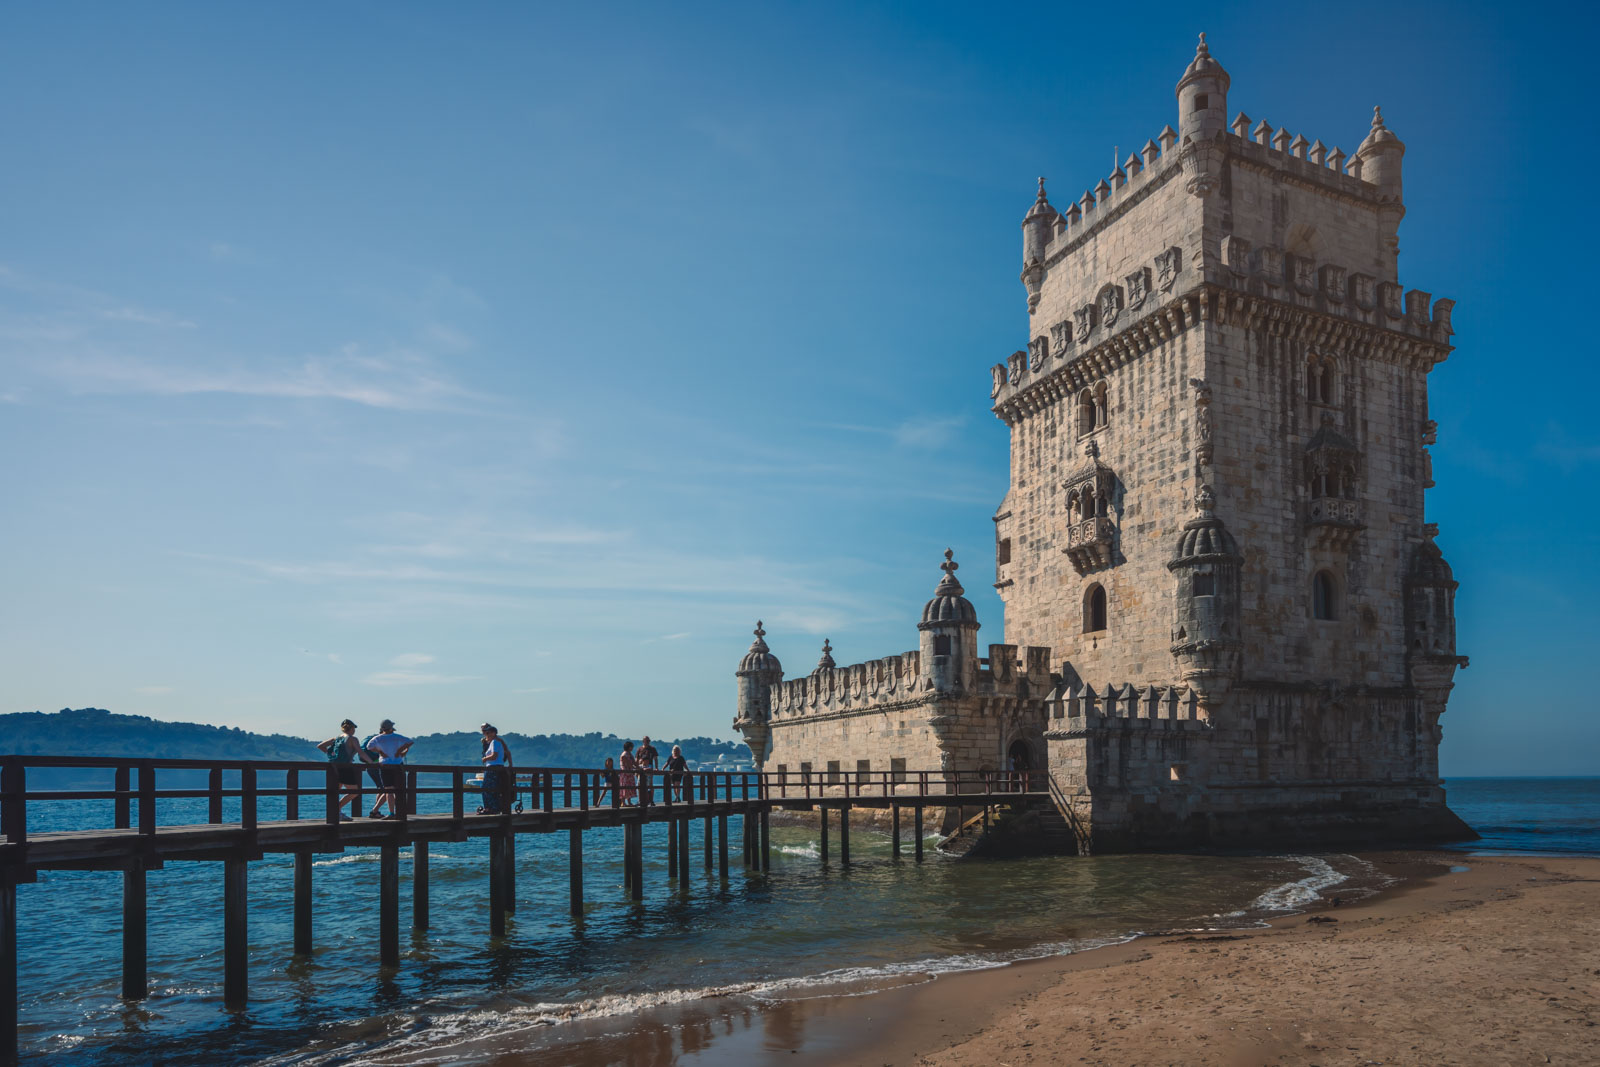 Where to stay in Belem Castle, Lisbon?